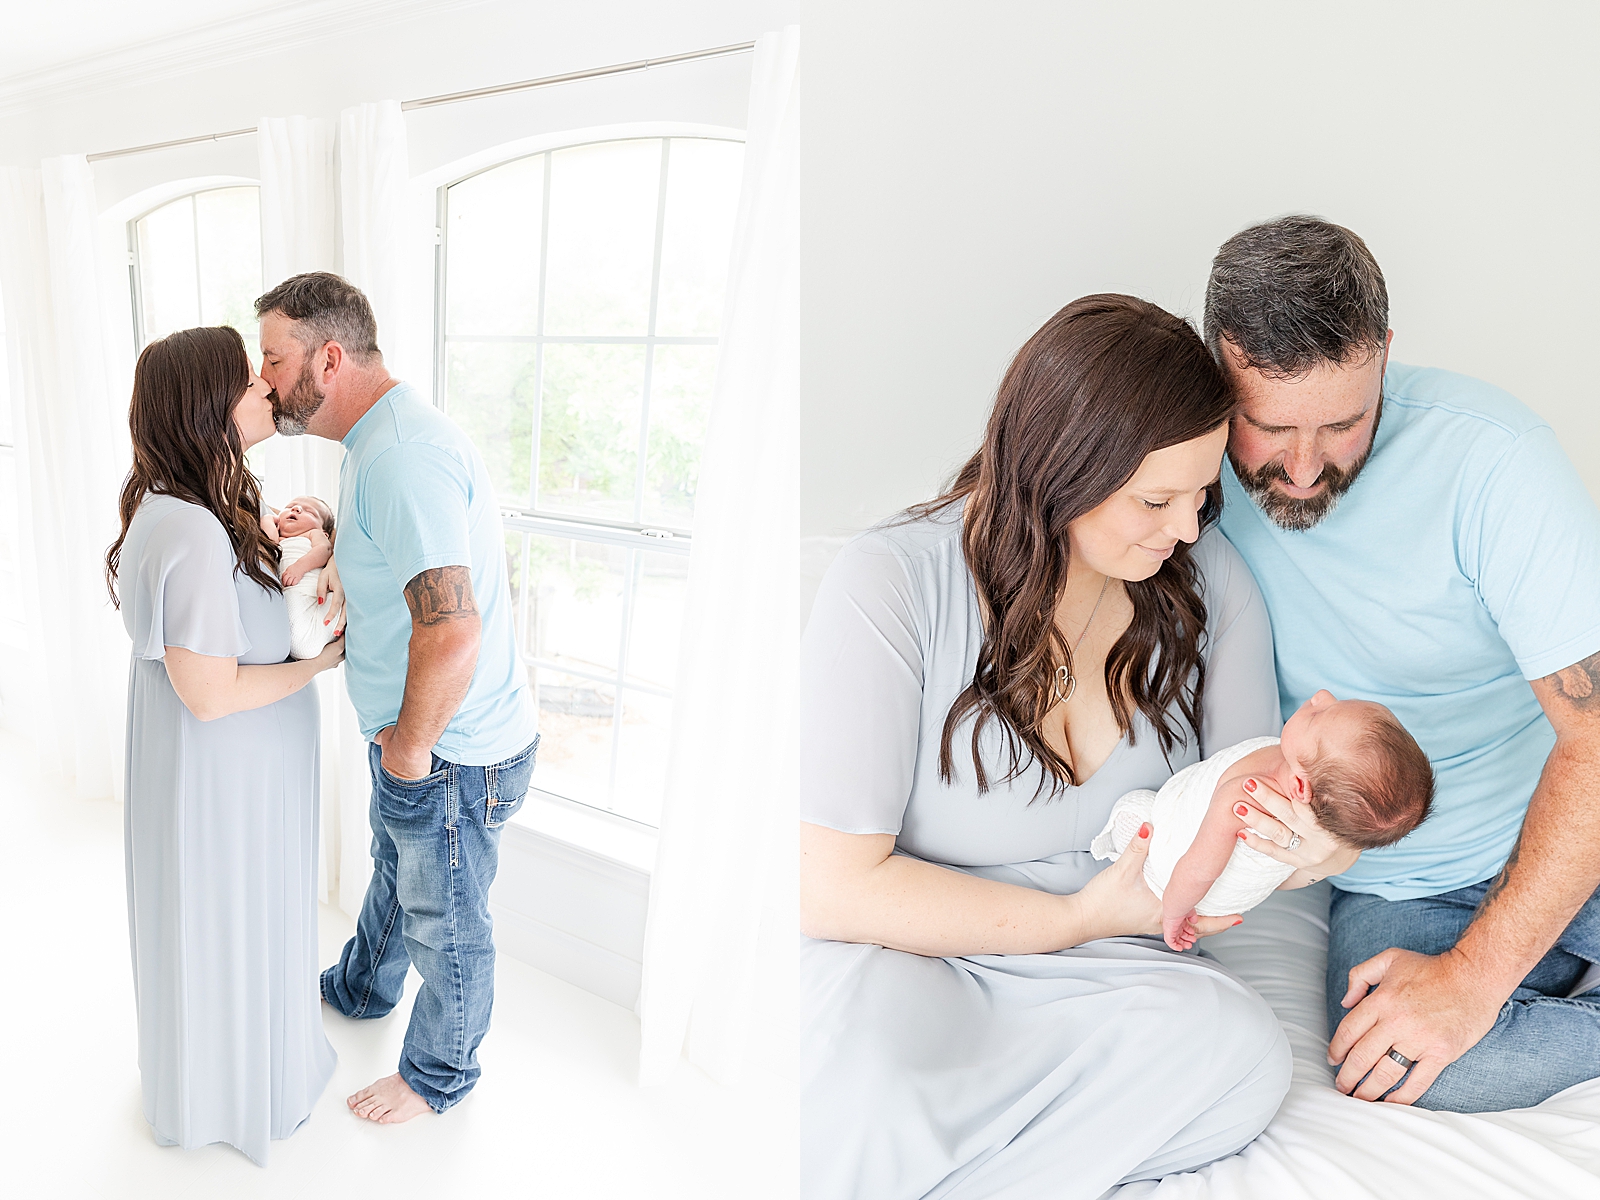 Mom and dad standing and kissing while holding newborn and mom and dad sitting on white bed looking down at baby both wearing blue